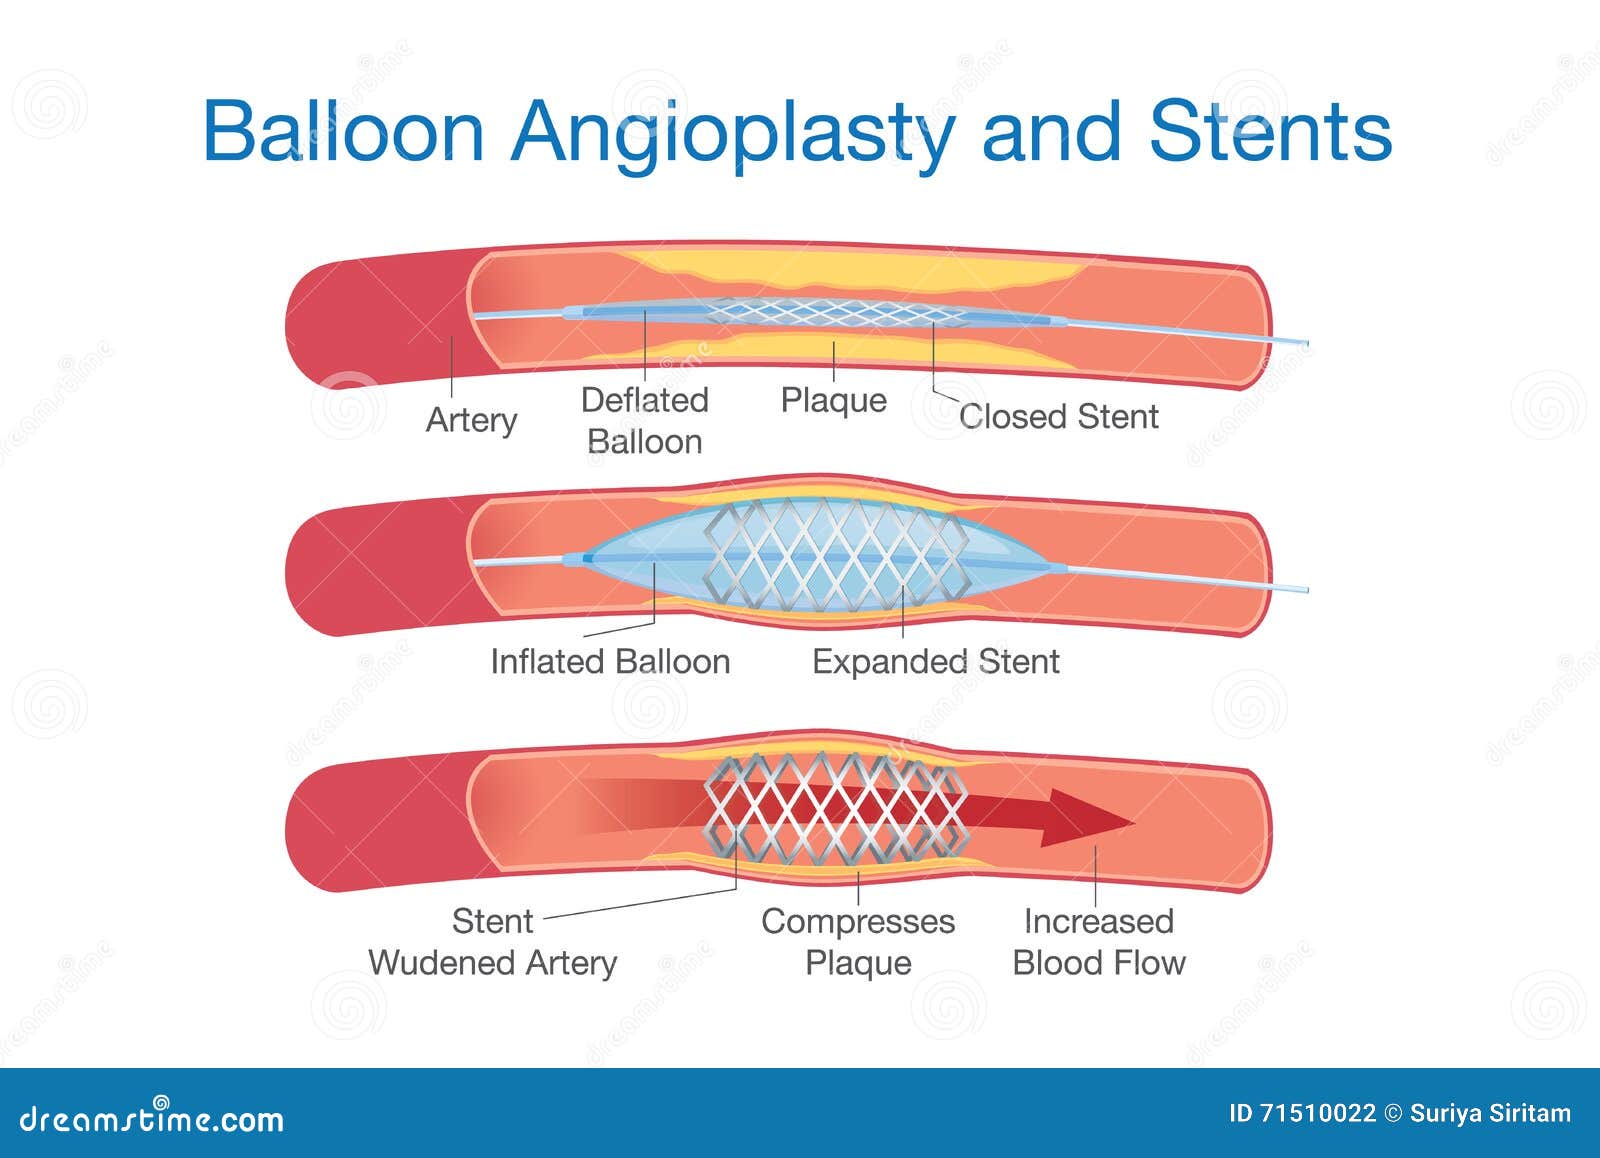 balloon angioplasty and stents procedure